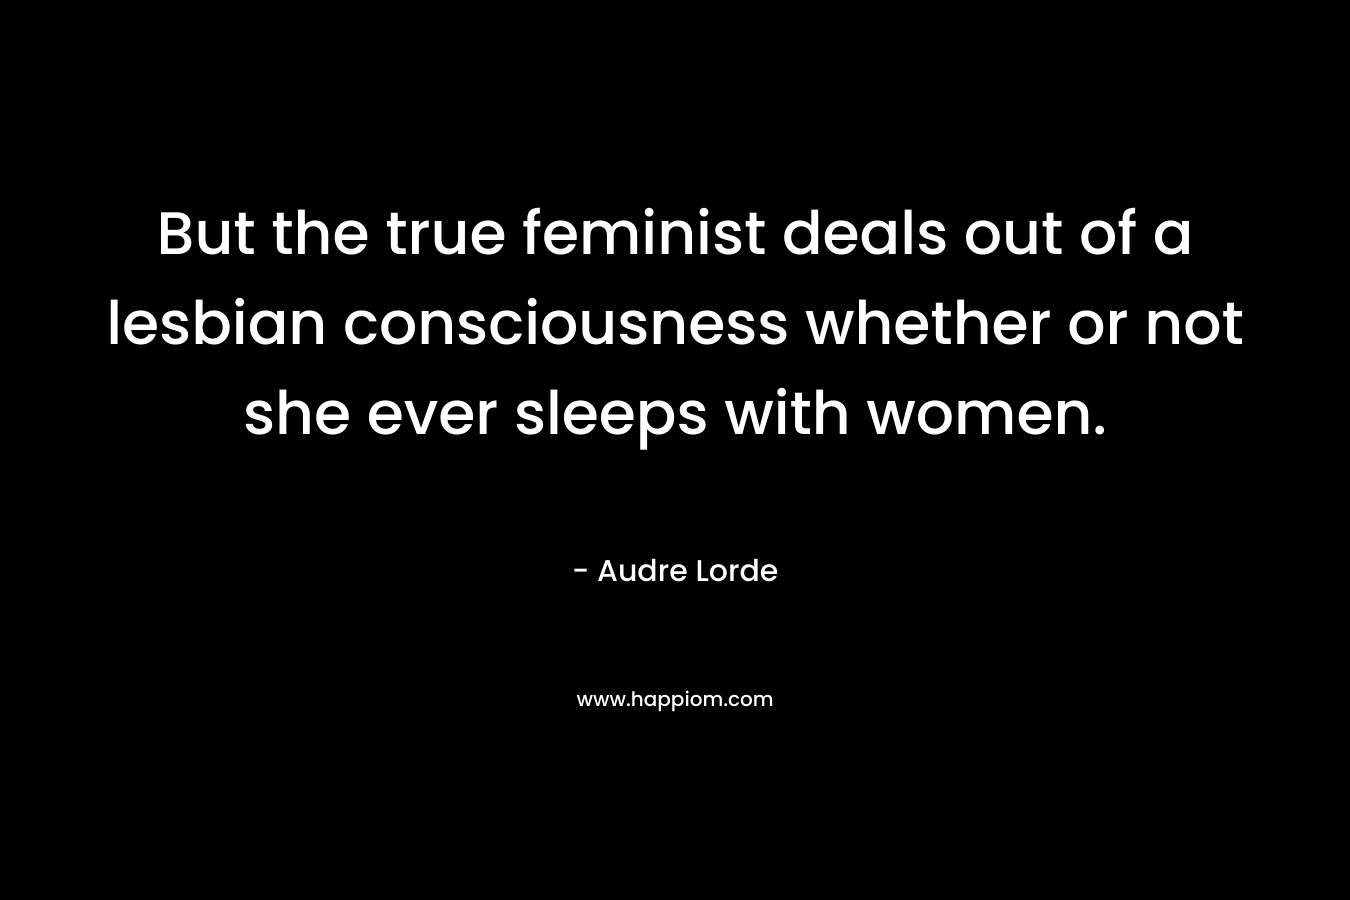 But the true feminist deals out of a lesbian consciousness whether or not she ever sleeps with women. – Audre Lorde